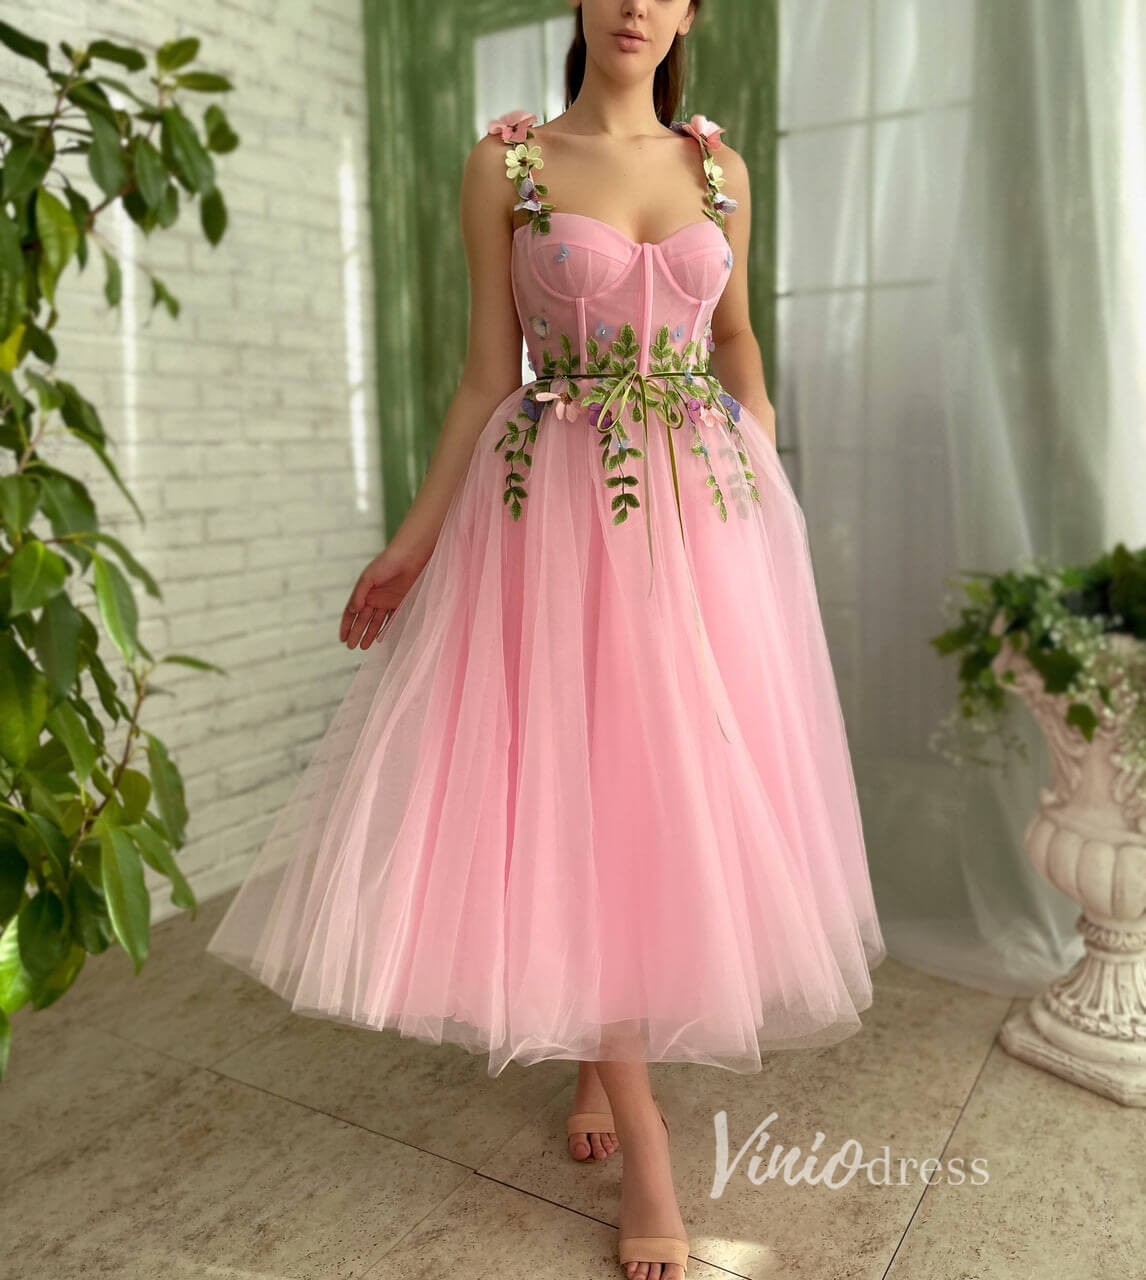 Viniodress Bright Pink Tulle Prom Dress with Pockets Green Leaves Maxi Dress SD1439 Pink / US4